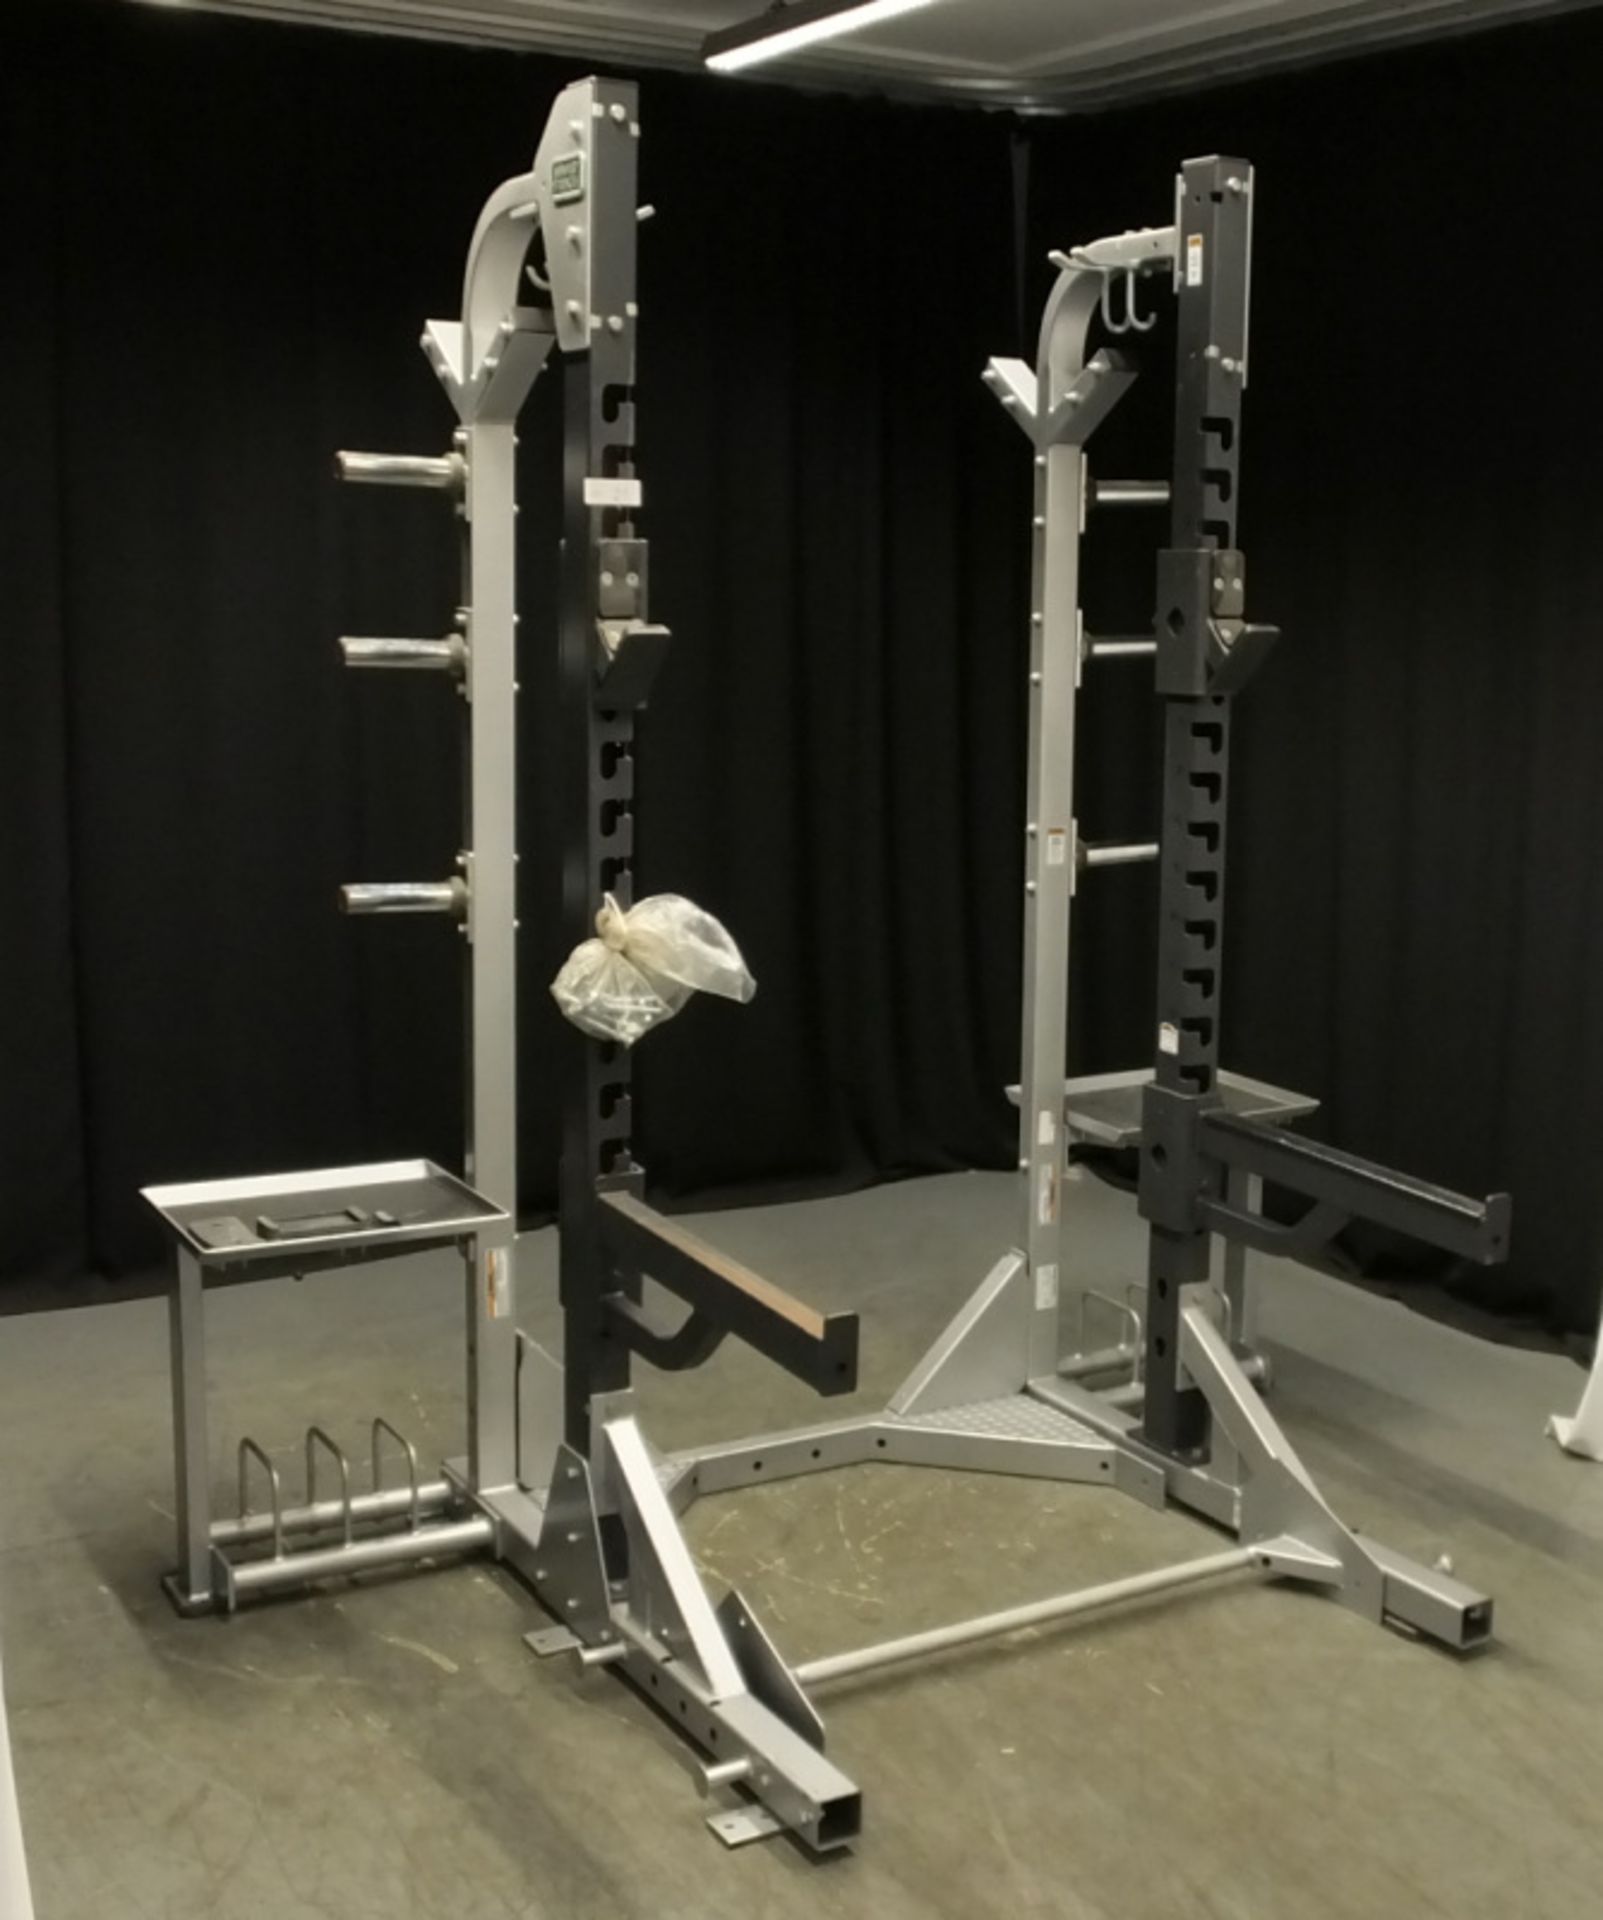 Hammer Strength Half Rack System with Kettlebell & Weight Storage - L2360 x D1460 x H2450m - Image 2 of 18